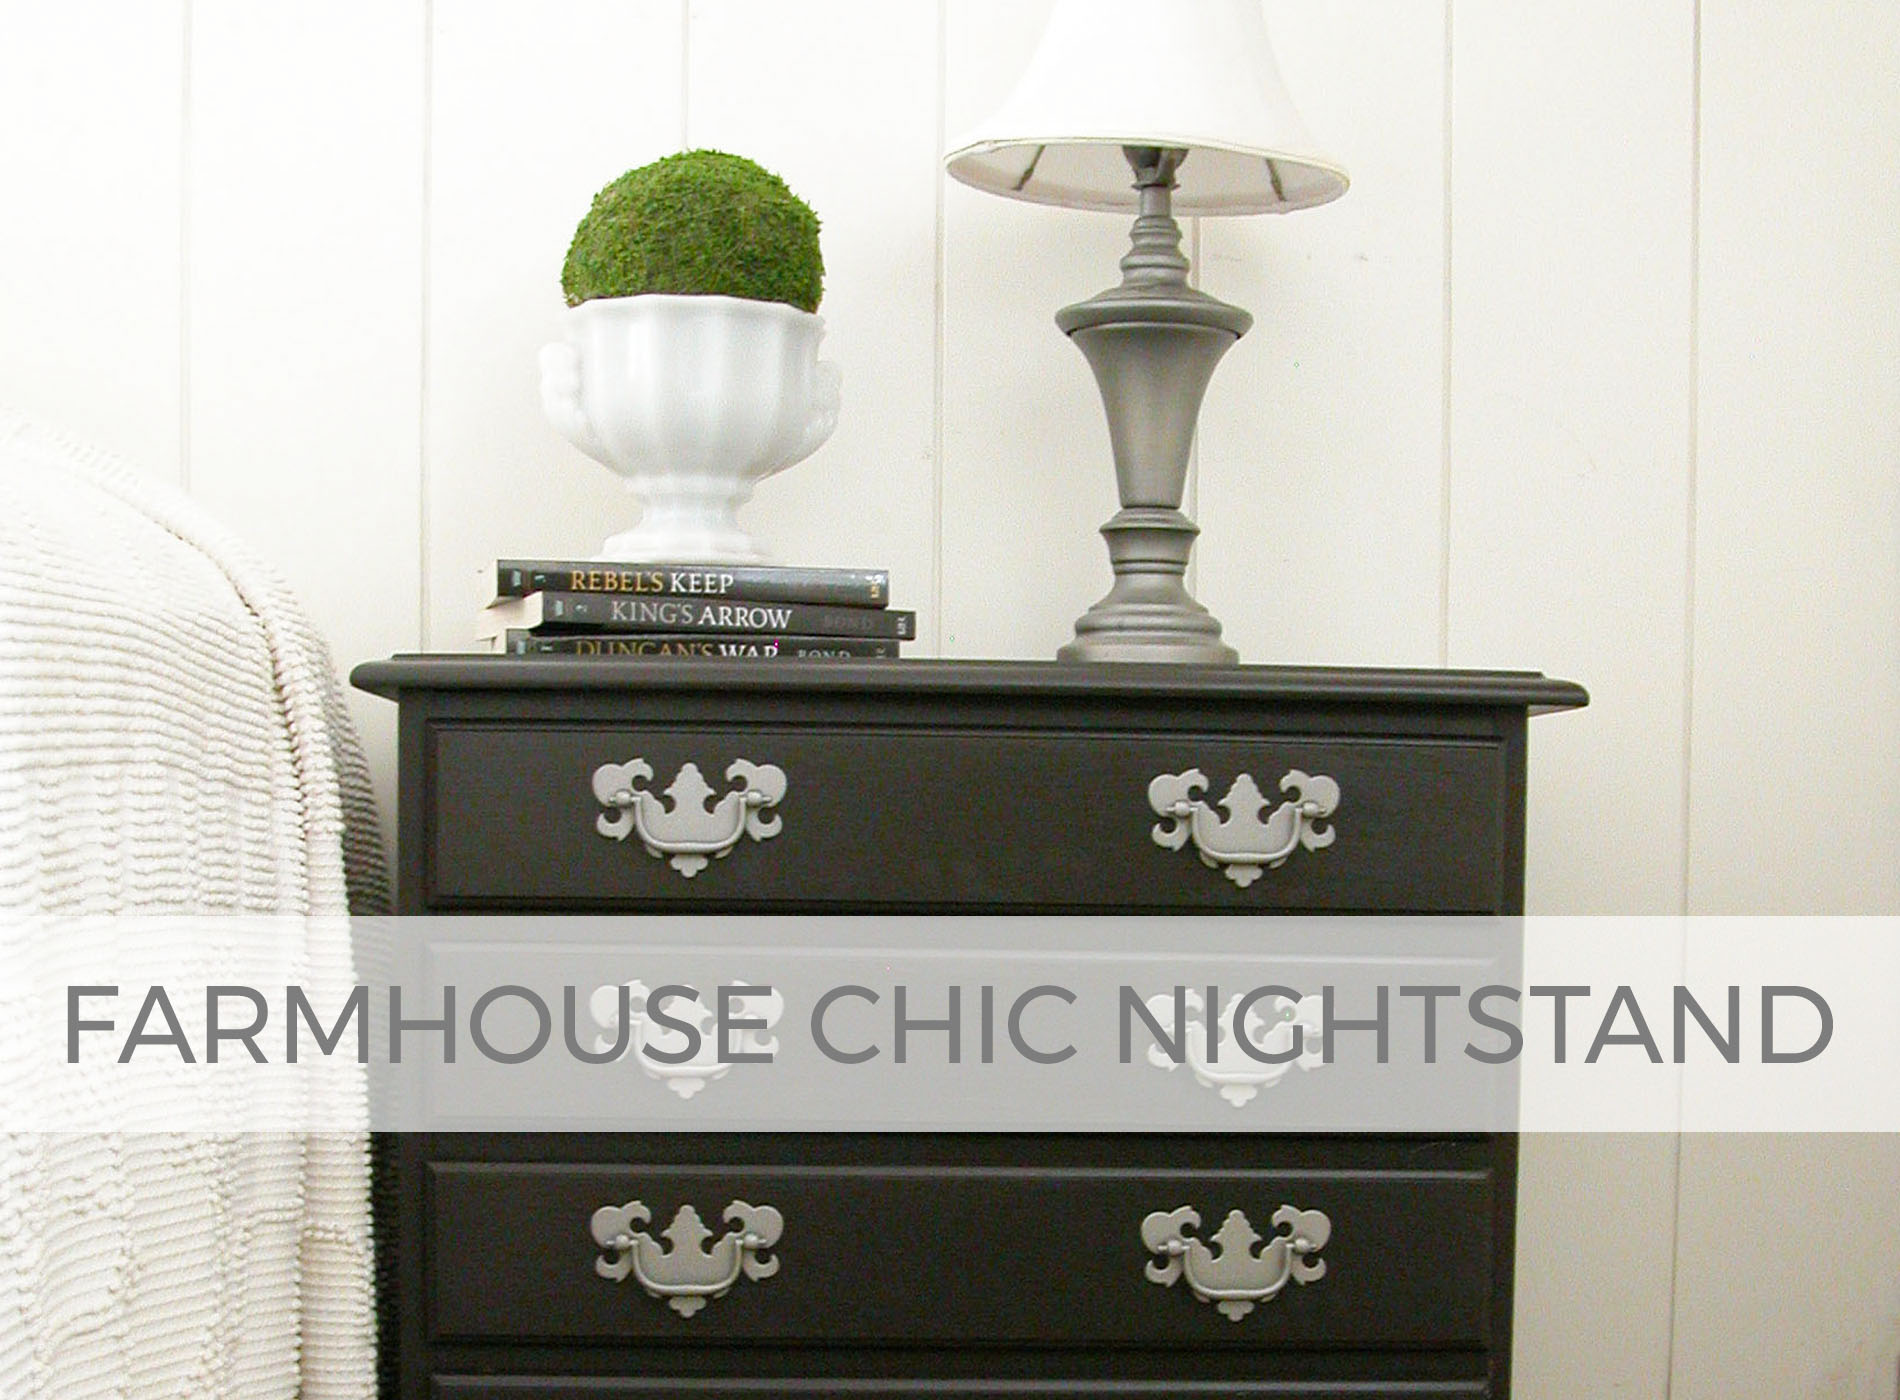 Farmhouse Chic Nightstand by Larissa of Prodigal Pieces | prodigalpieces.com